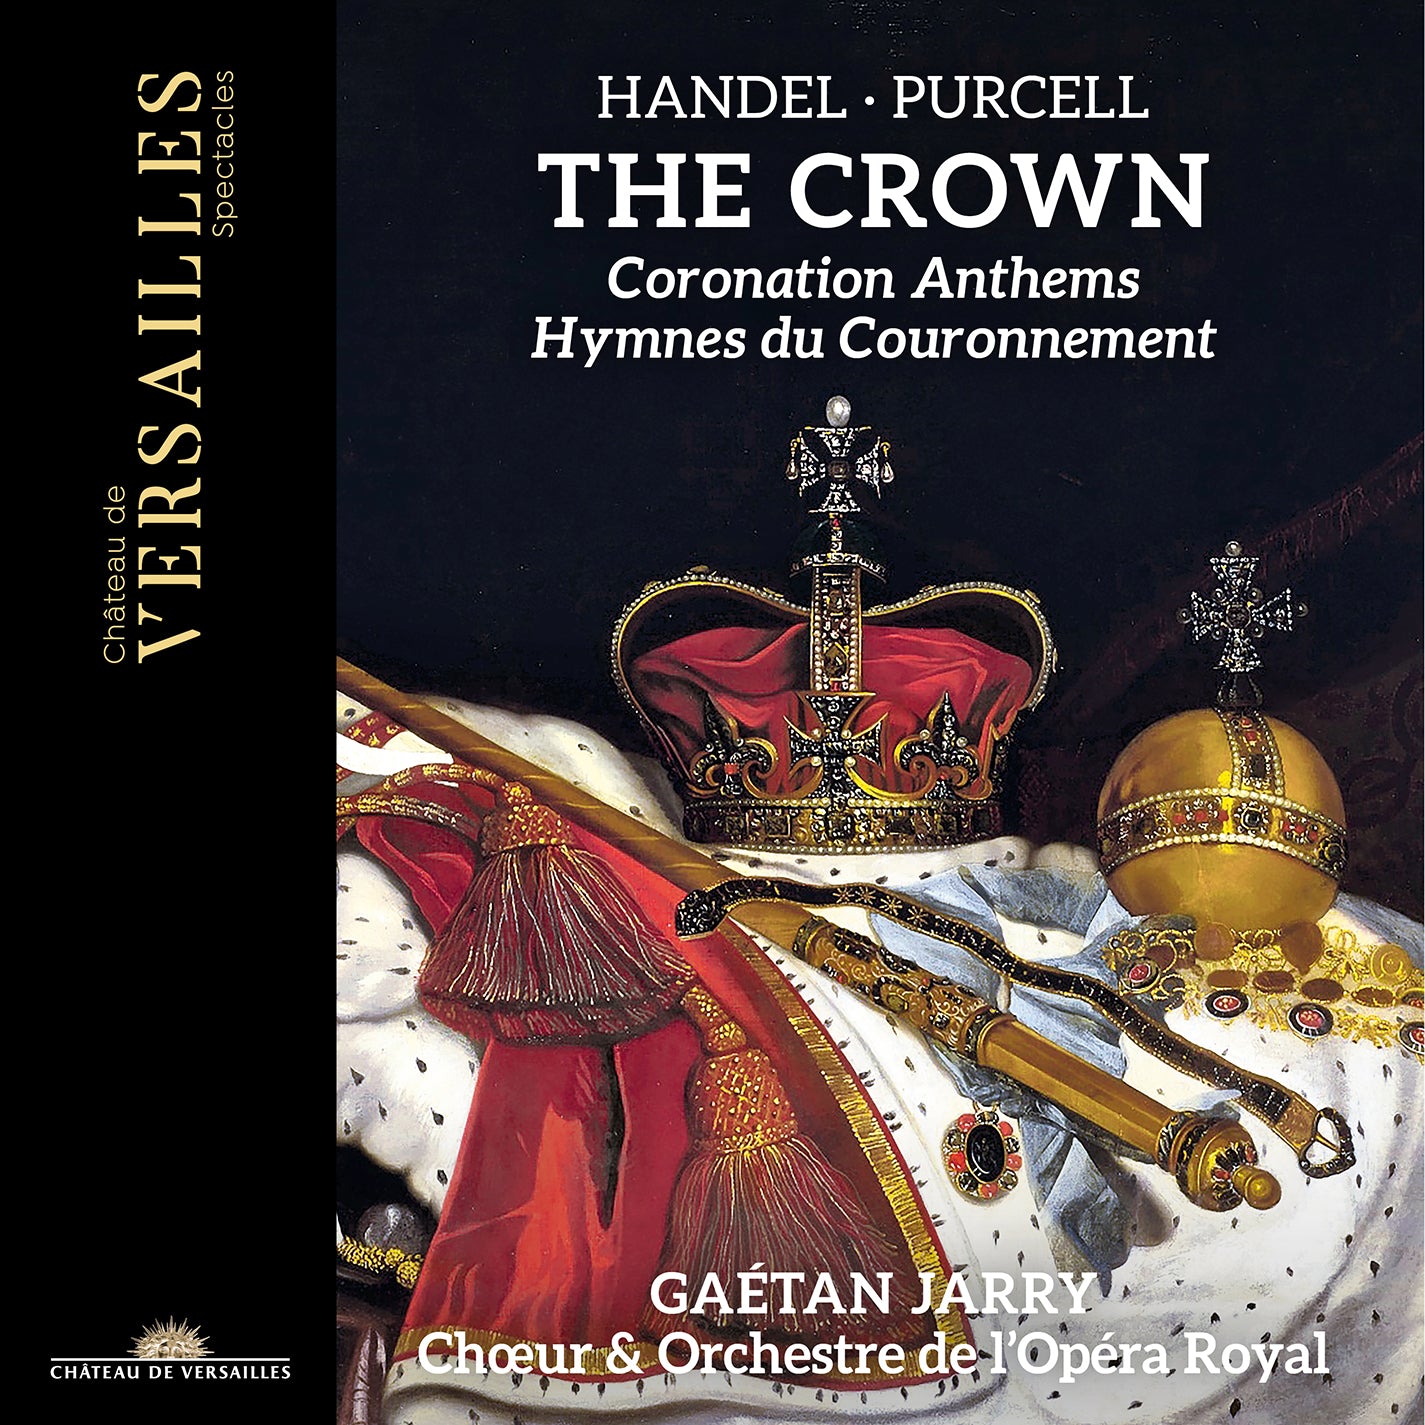 Handel & Purcell: The Crown - Coronation Anthems